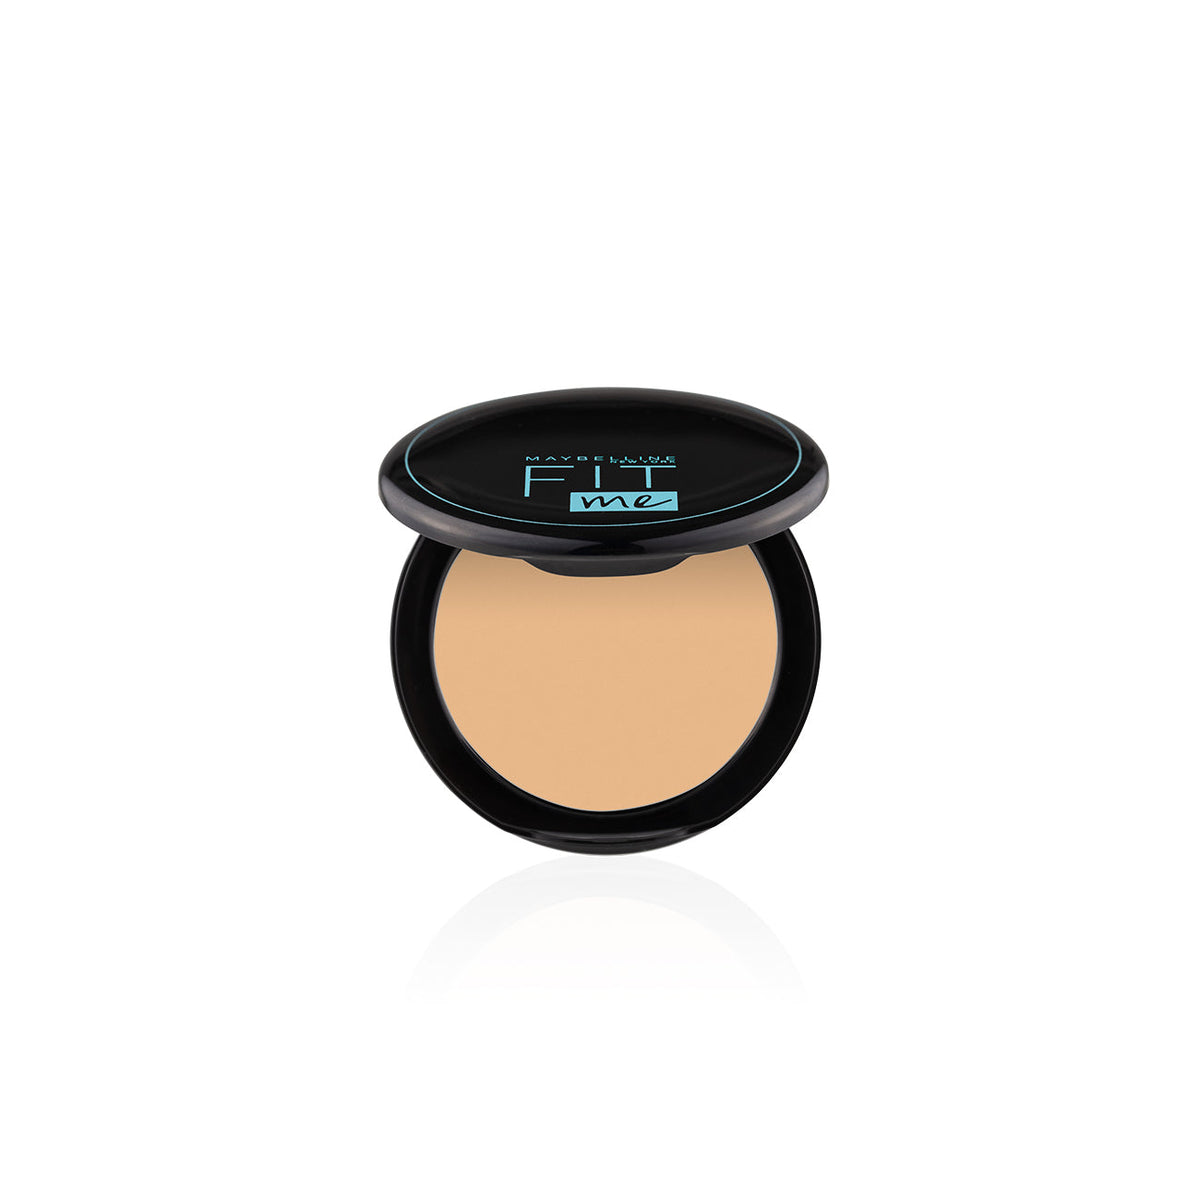 Maybelline New York Fit Me Matte & Poreless Compact Powder - 128 Warm Nude